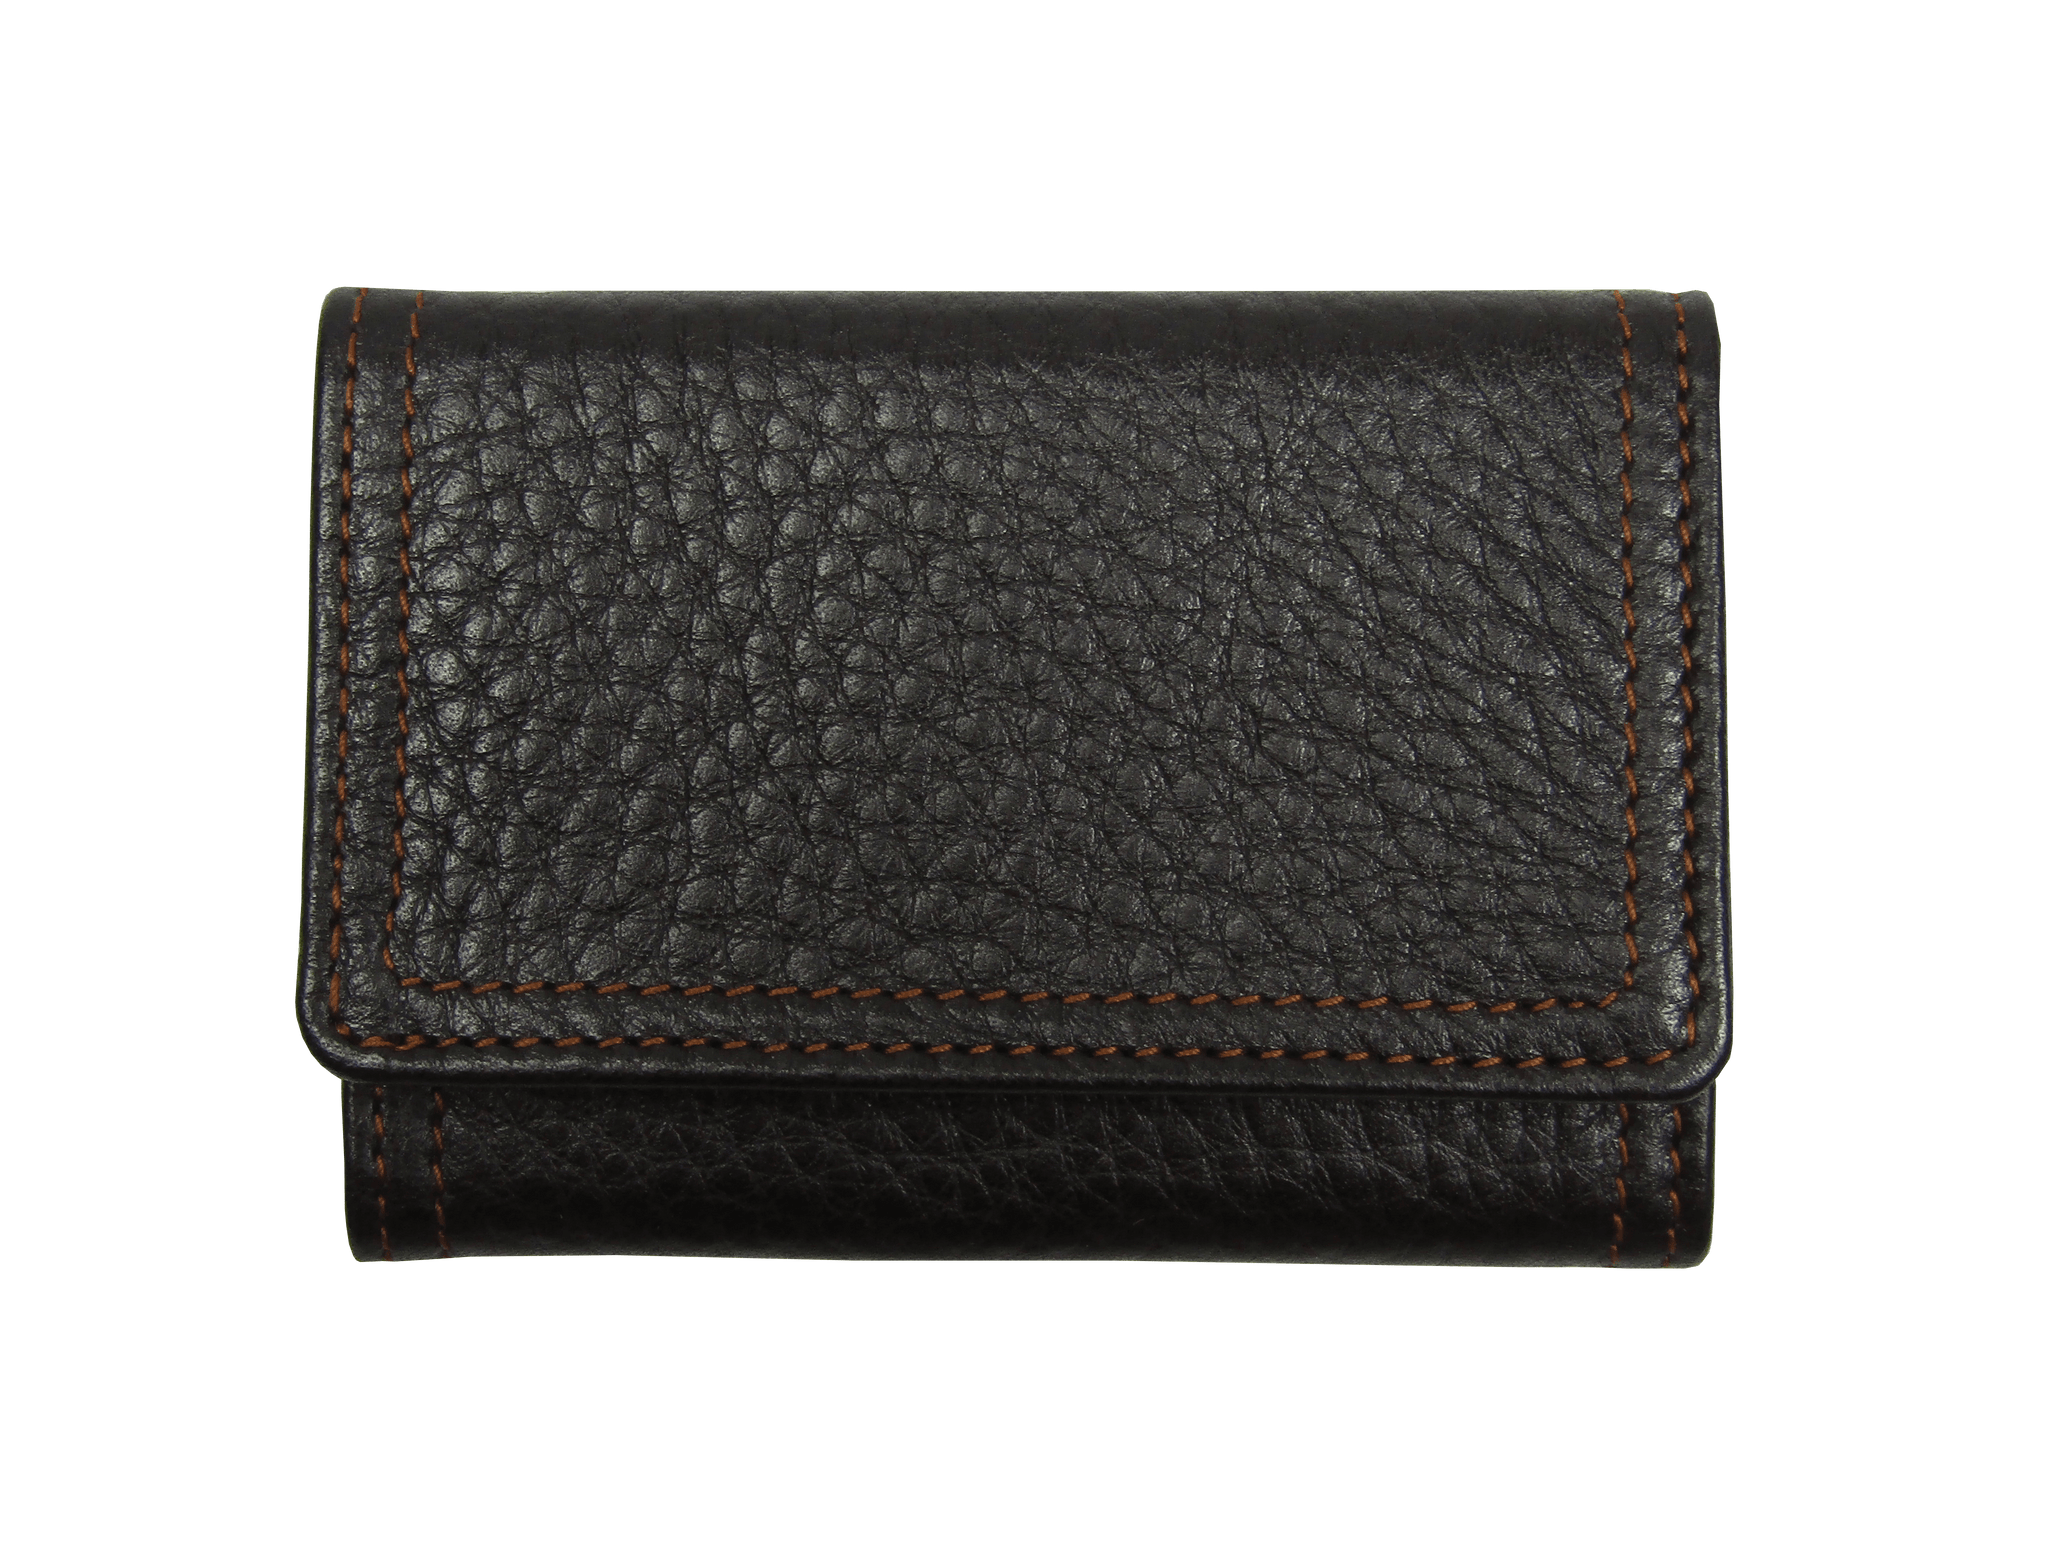 Small Leather Wallet in Brown Grained Calf Leather